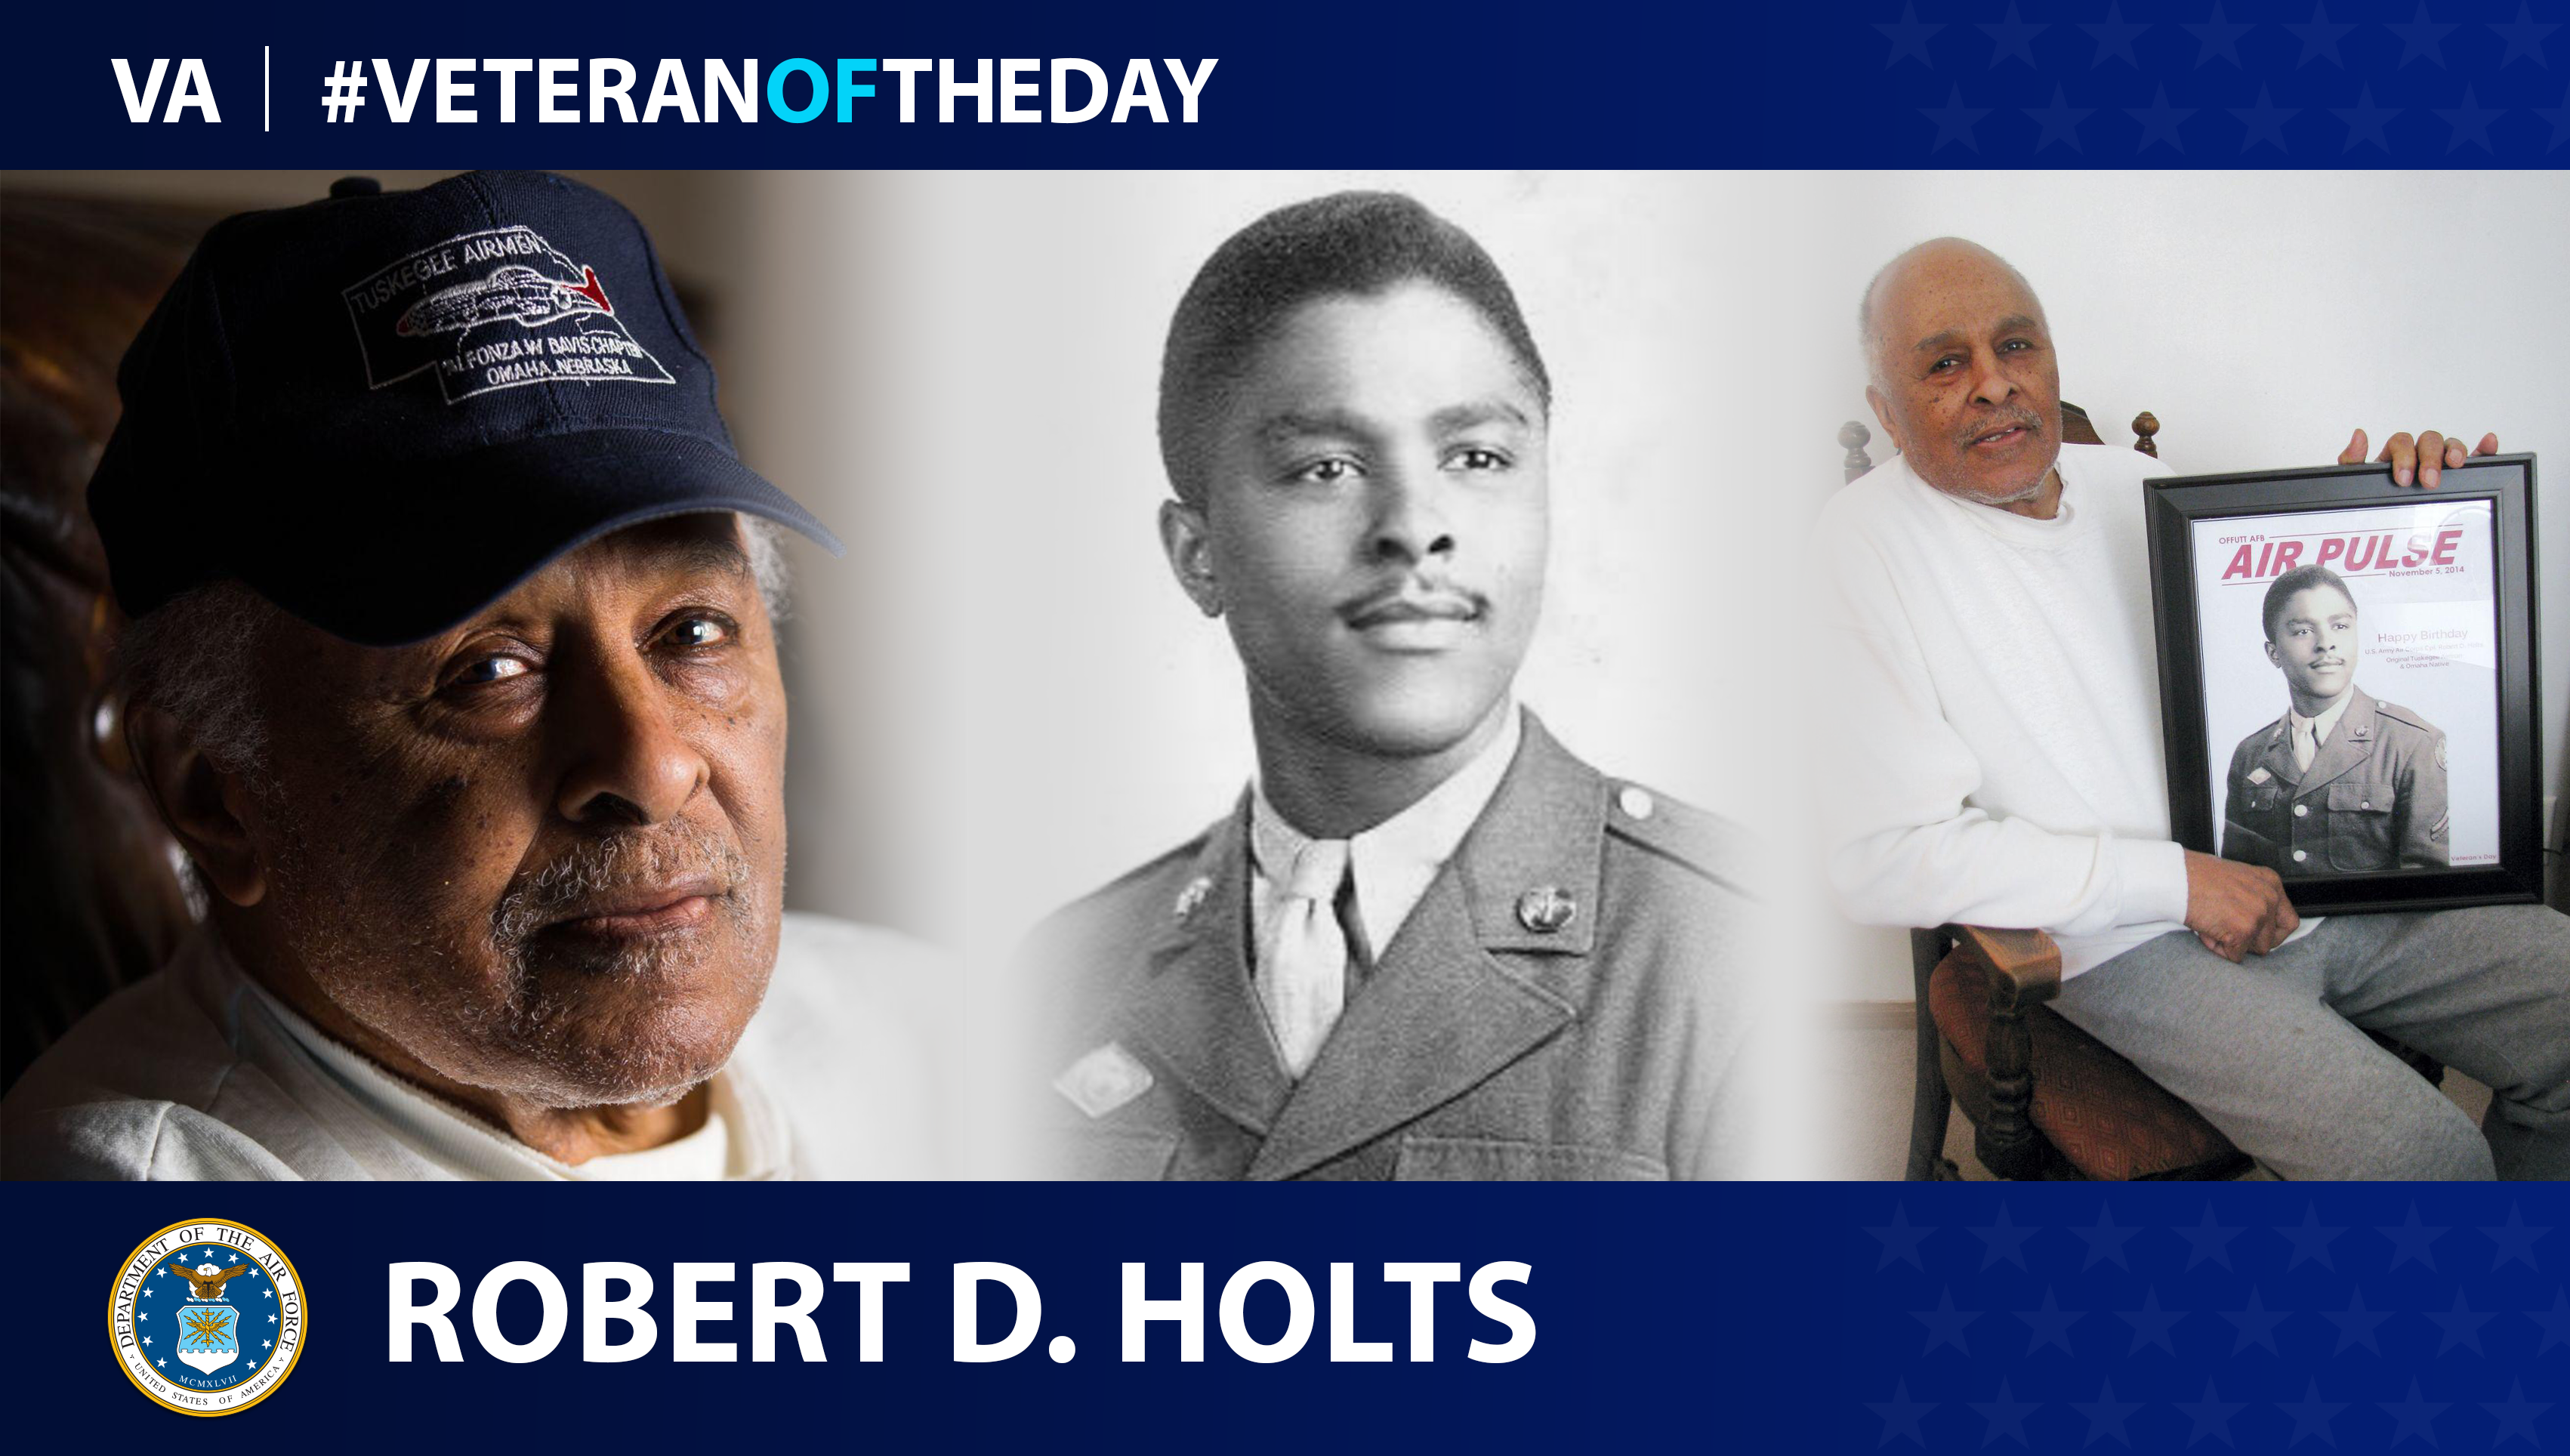 U.S. Army Air Corps Veteran Robert Holts is today’s Veteran of the Day.